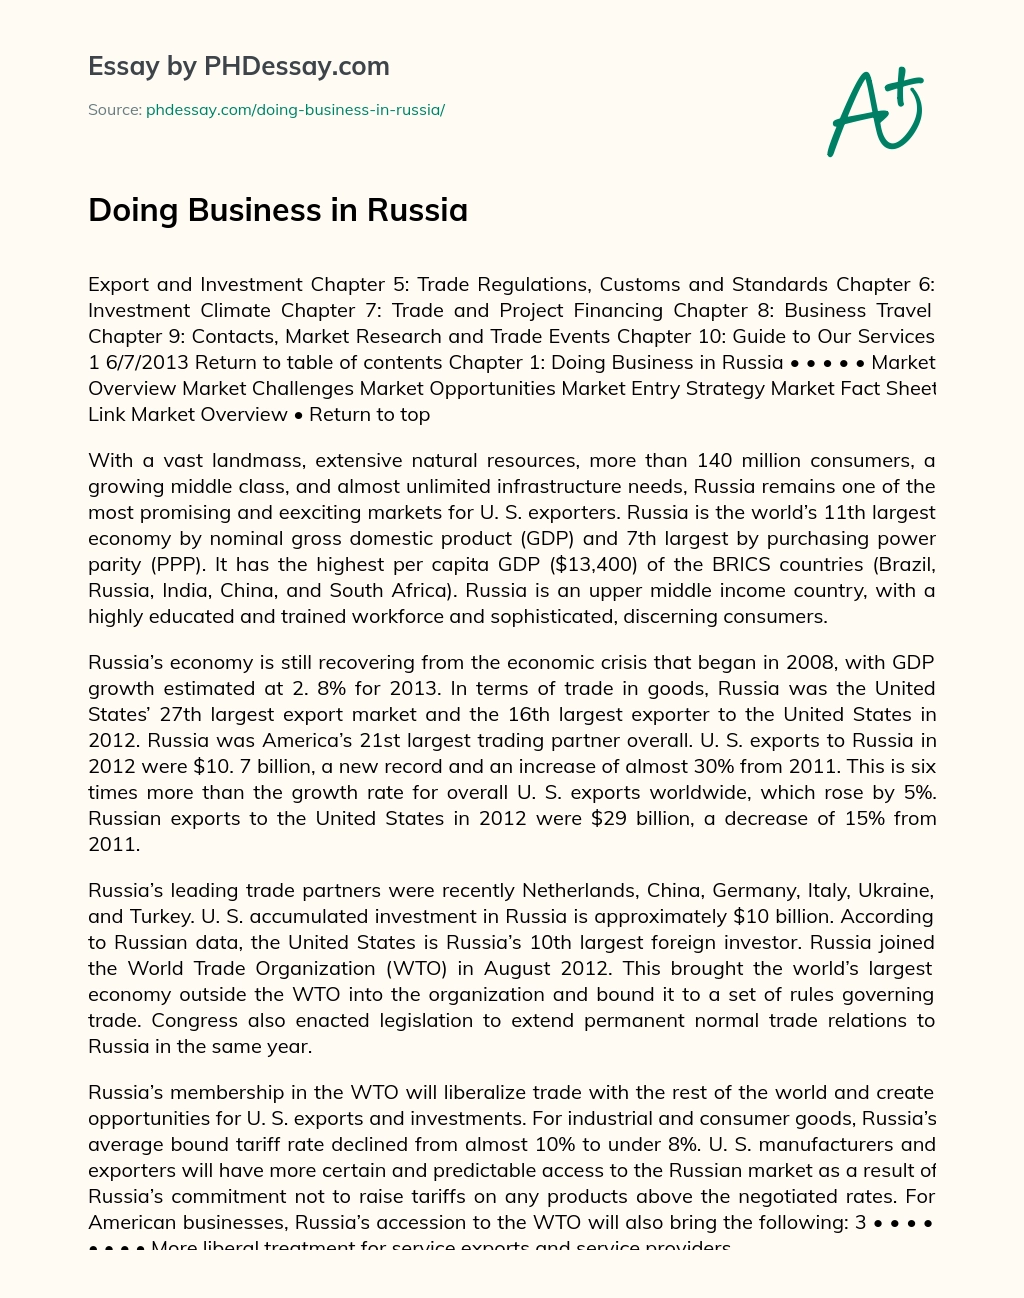 Doing Business in Russia essay